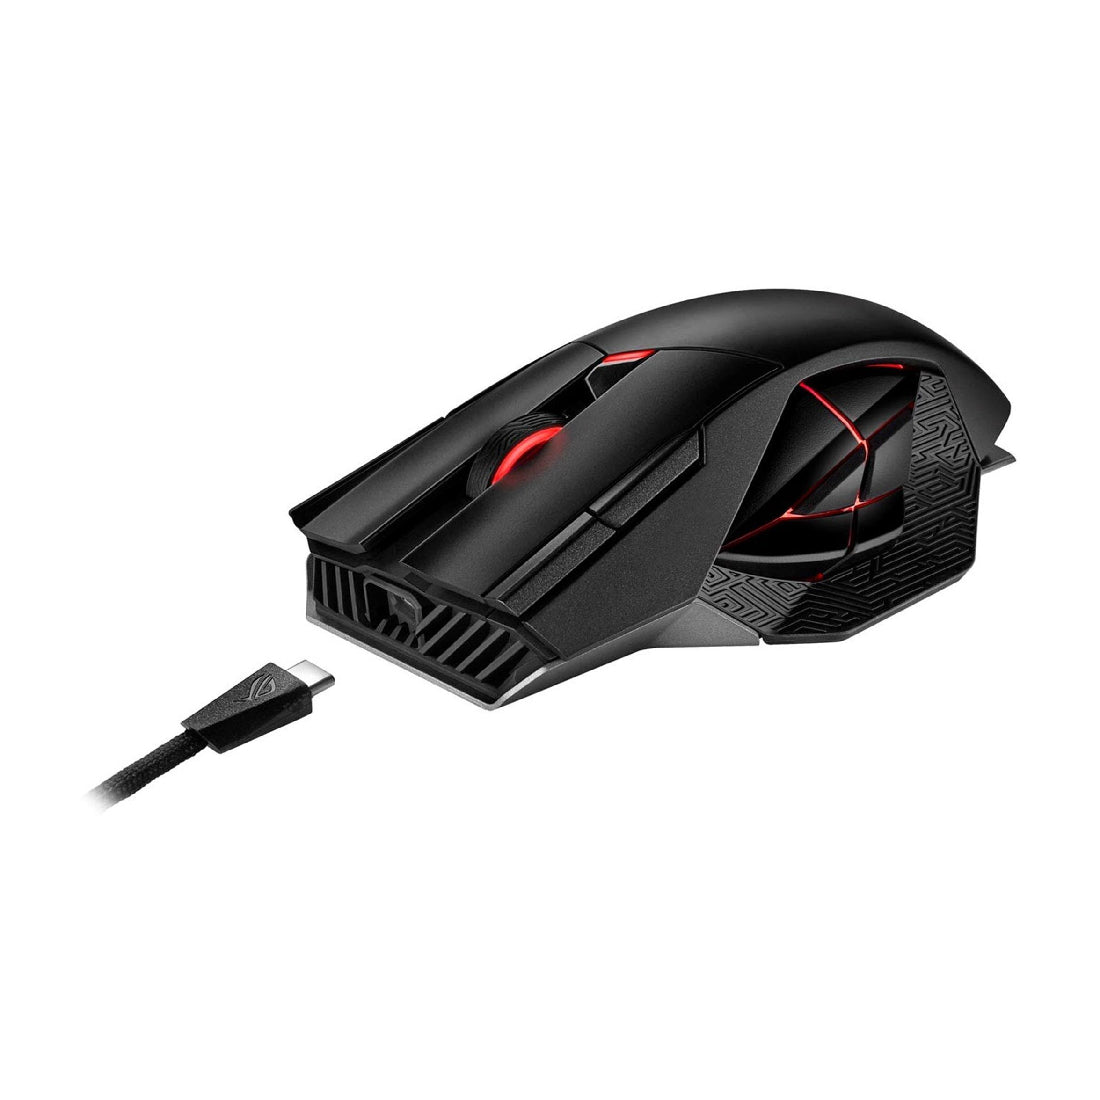 Asus P707 Rog Spatha X Wireless Gaming Mouse - Black - Store 974 | ستور ٩٧٤